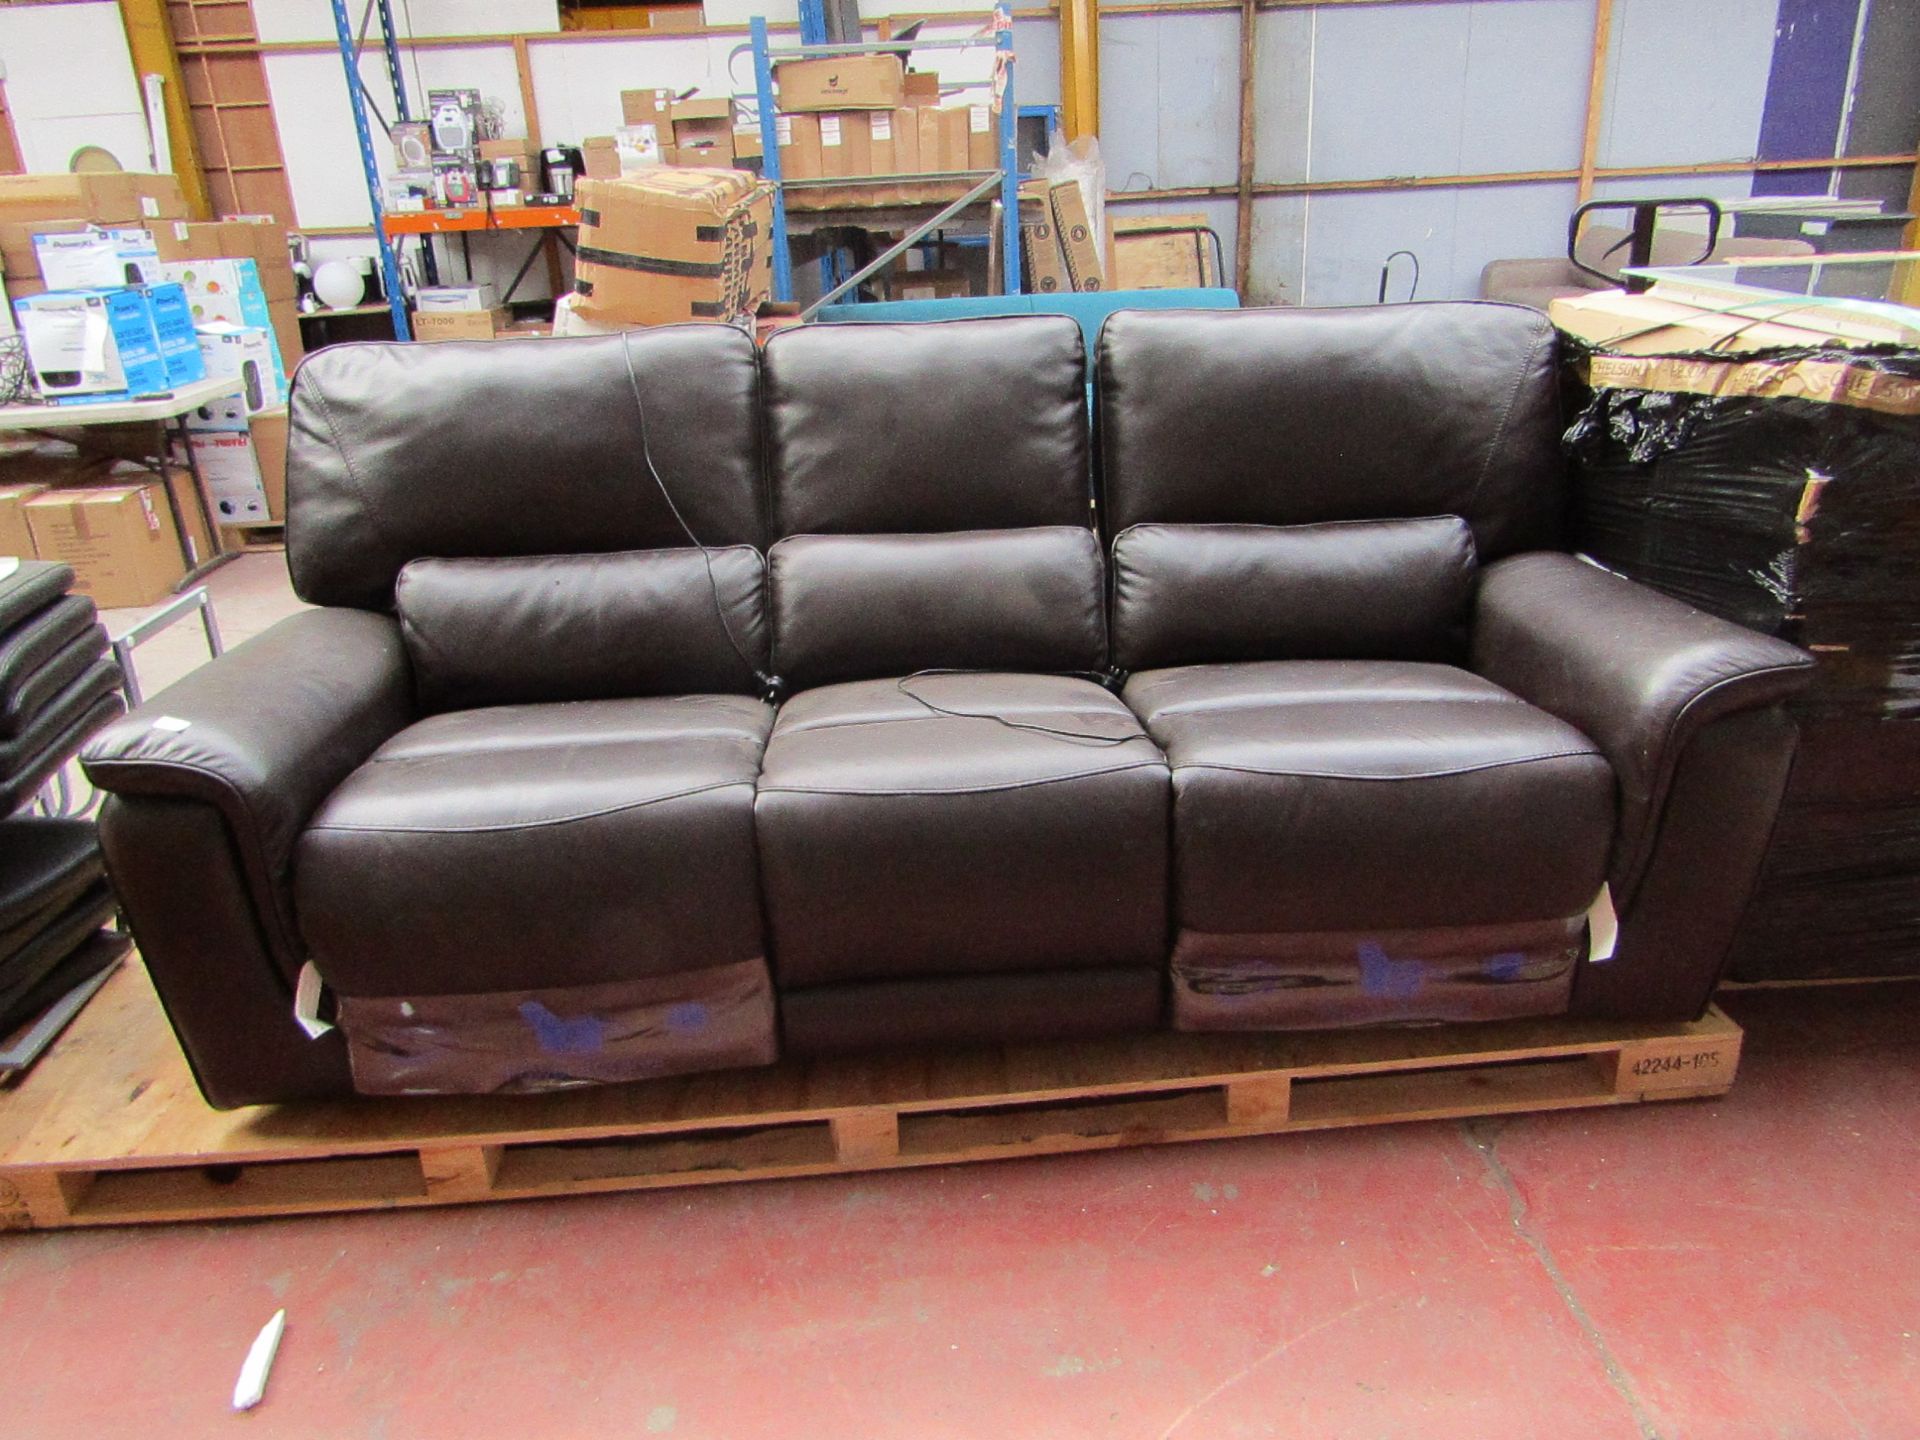 1x Costco 3 Seater Electric Recling Leather Sofa - Tested working & in good conditon - RRP £1200